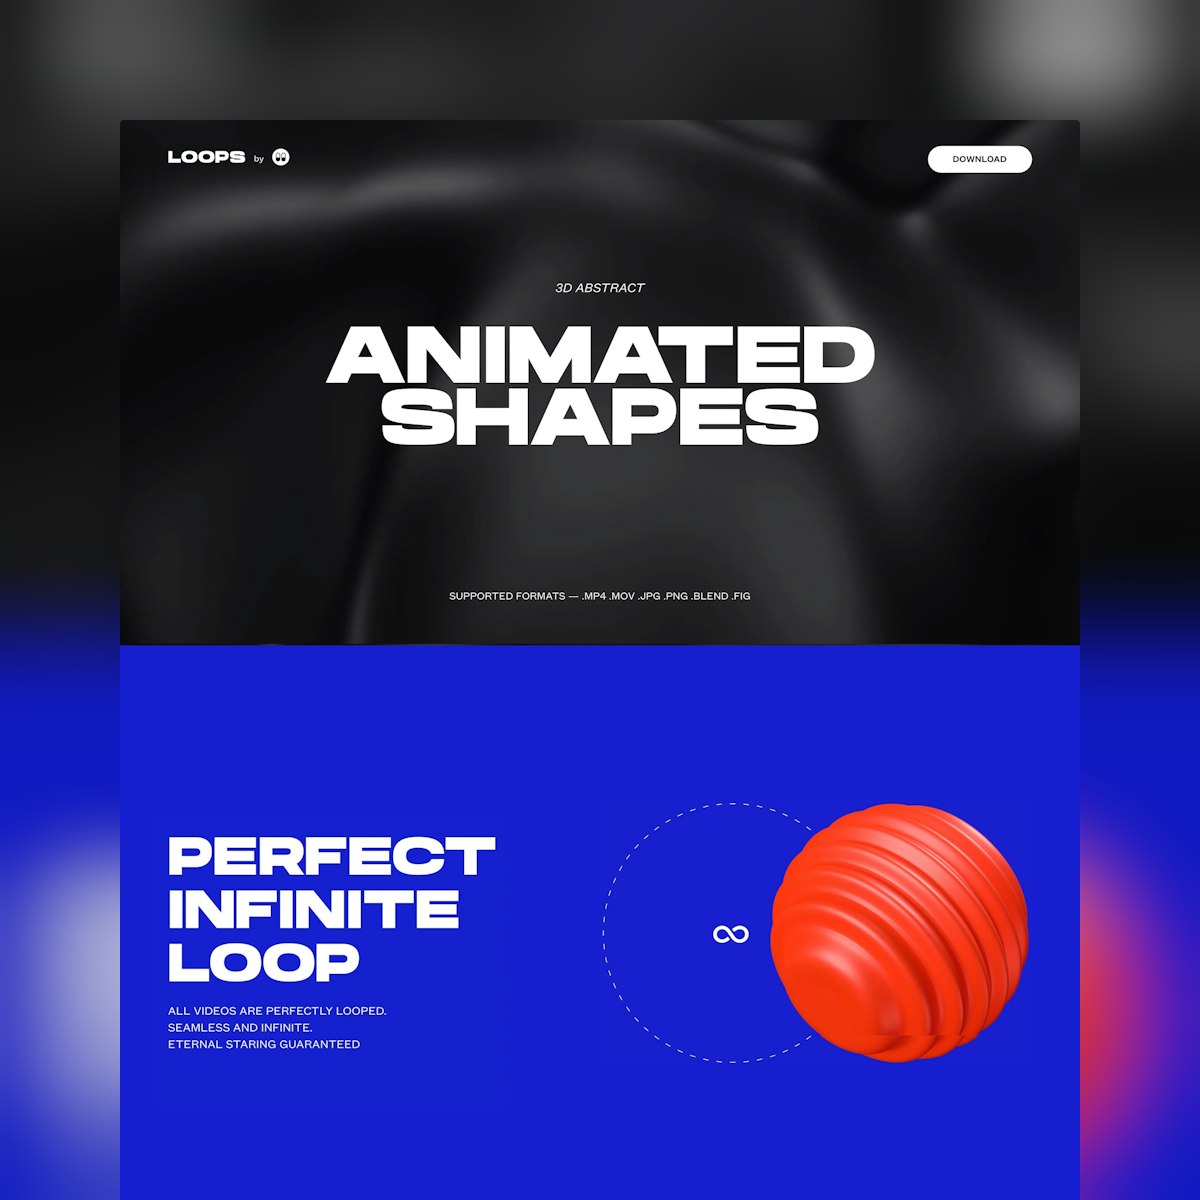 Product Page screen design idea #382: Website Inspiration: Loops